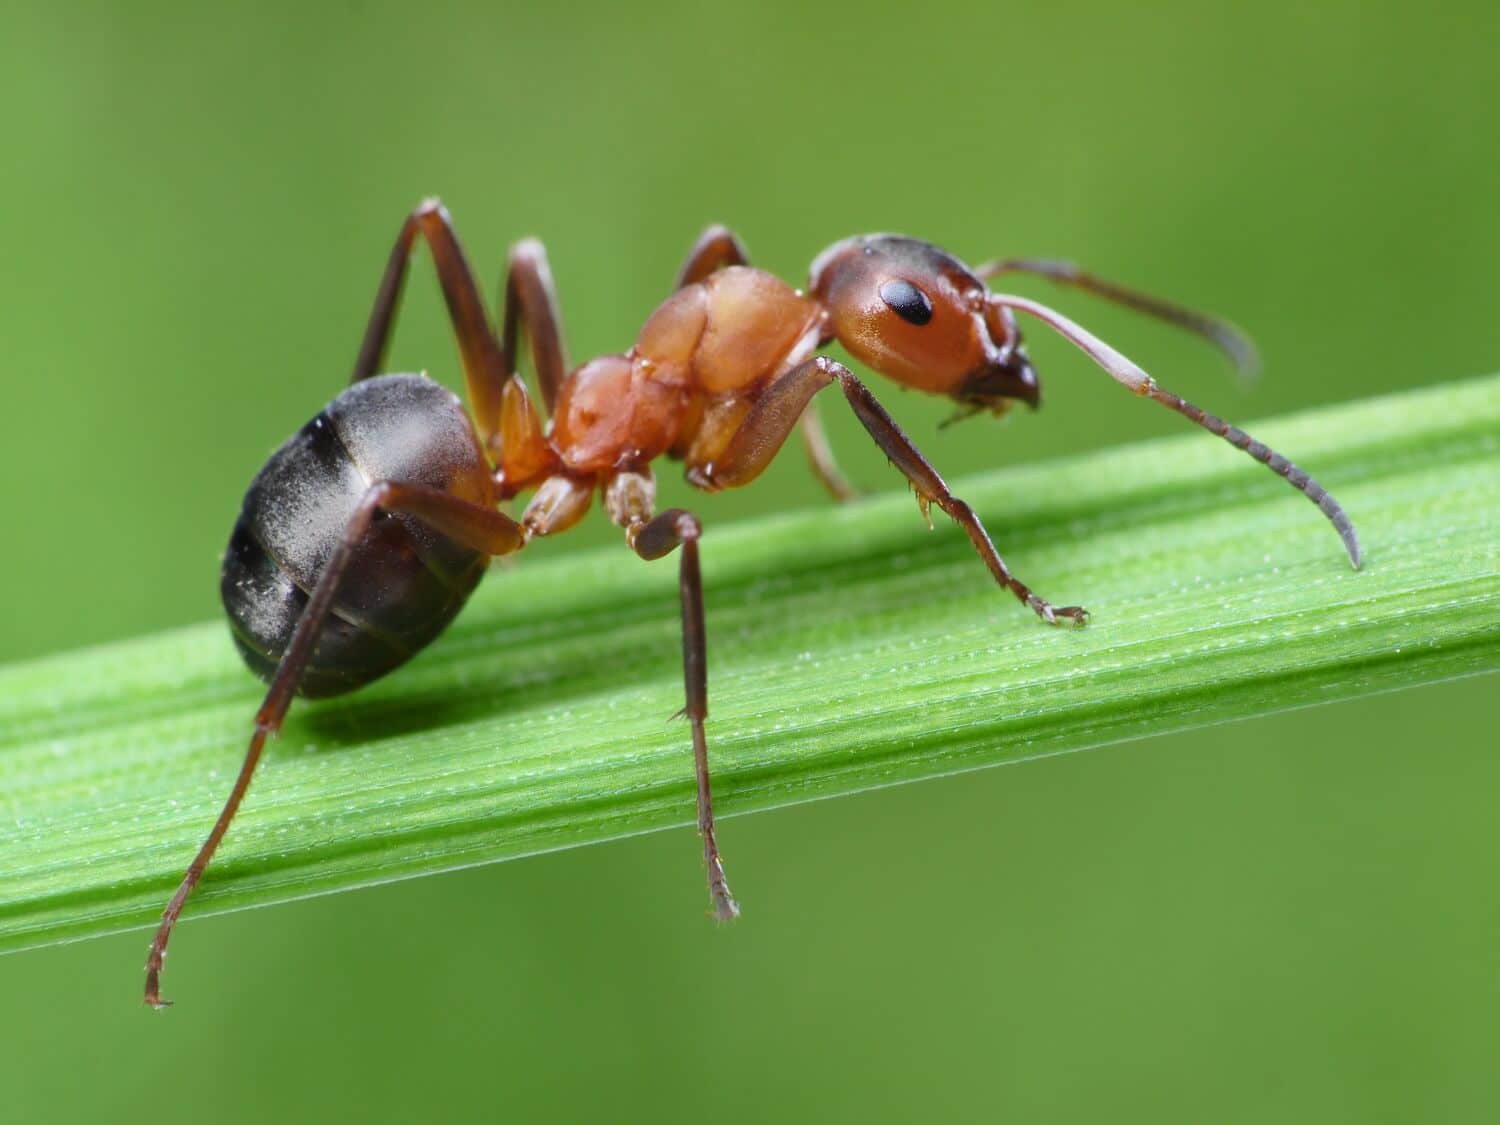 Large-Seezon-How-to-get-rid-of-ants-1